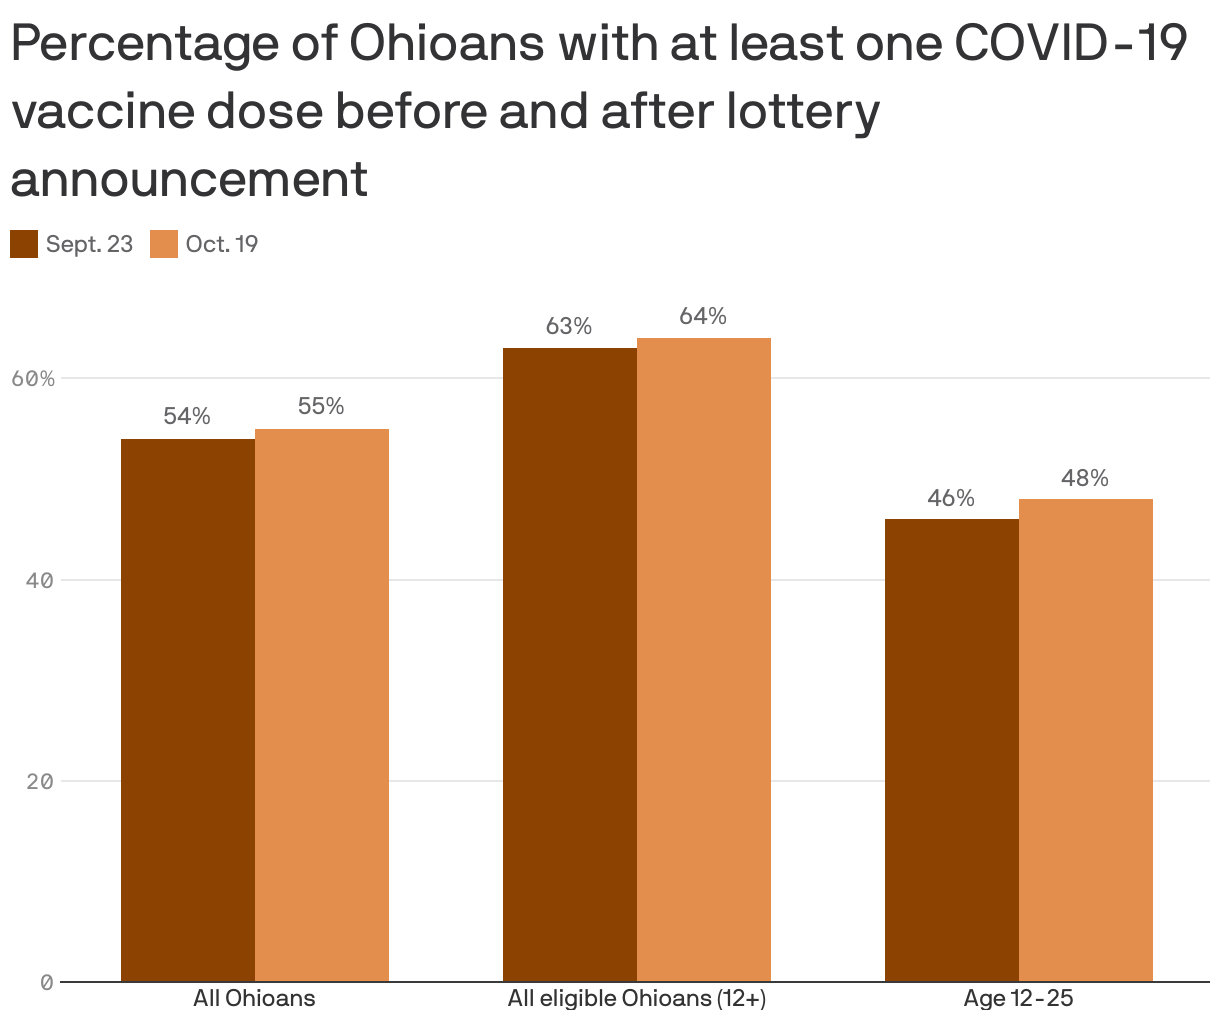 Percentage of Ohioans with at least one COVID-19 vaccine dose before and after lottery announement